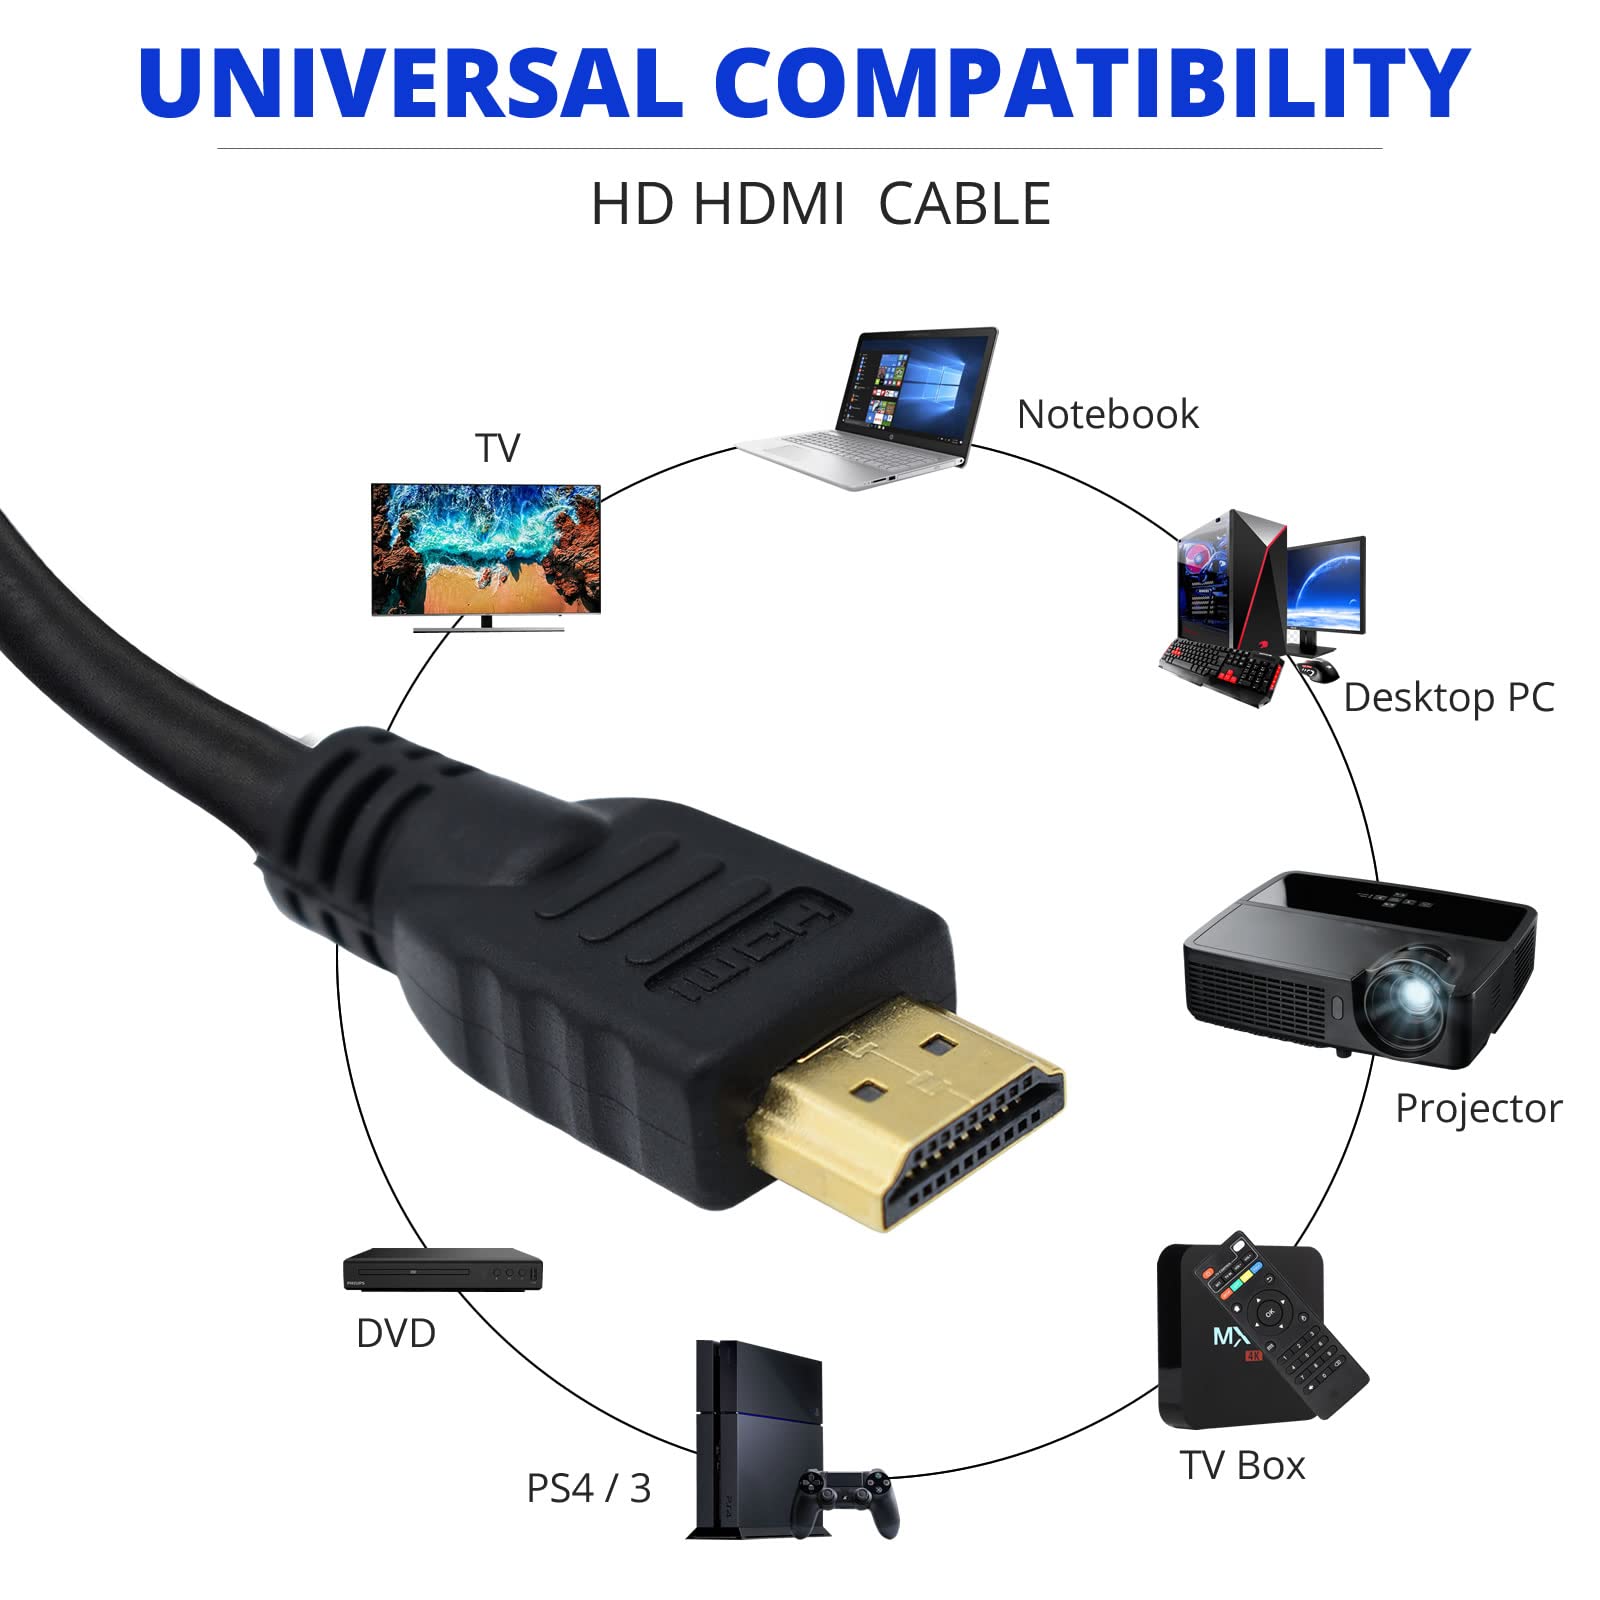 Check the HDMI cable:
Ensure the HDMI cable is securely connected to both the Nintendo Switch and the TV.